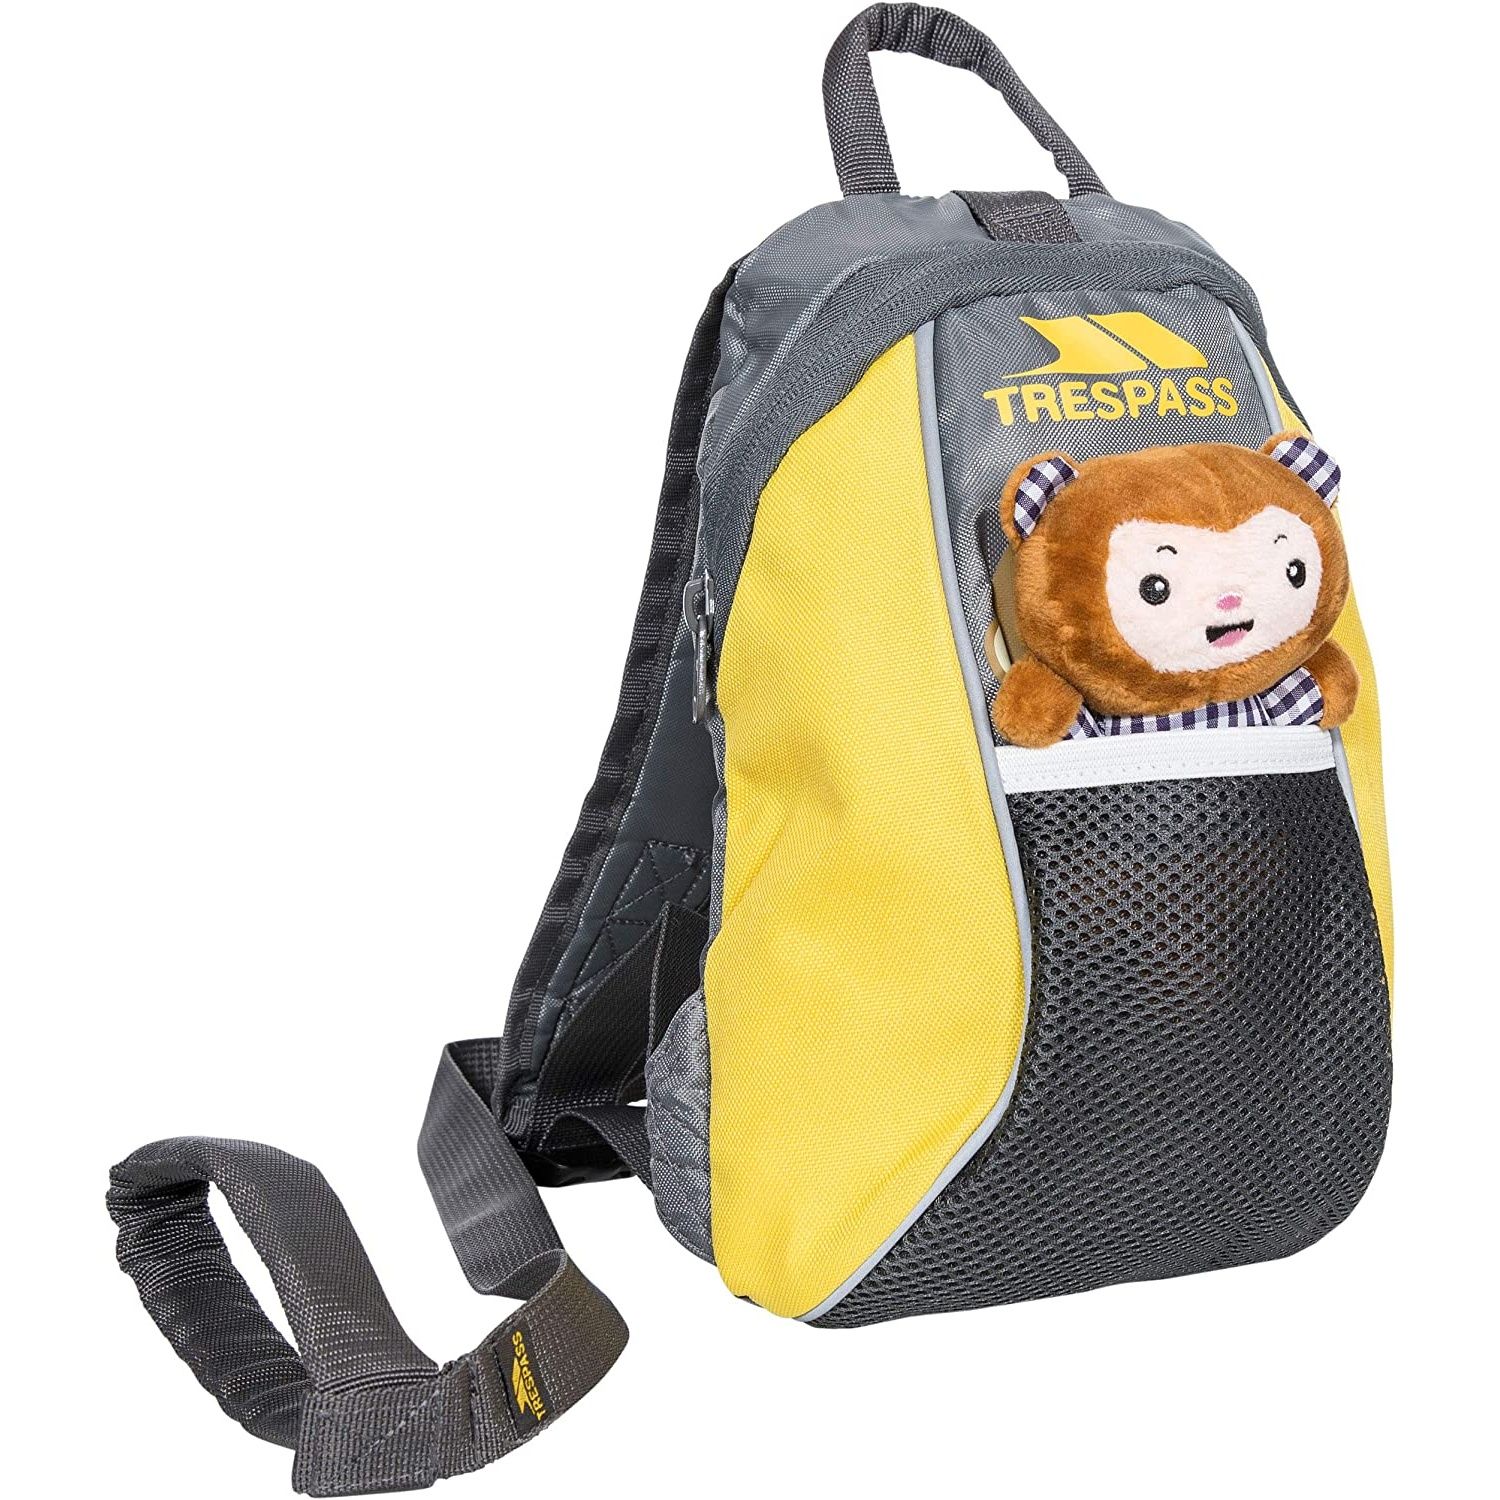 Babies 5 litre backpack. Detachable safety rein. Soft toy included. Mesh front pocket. Top handle. Zipped main compartment. 100% Polyester.